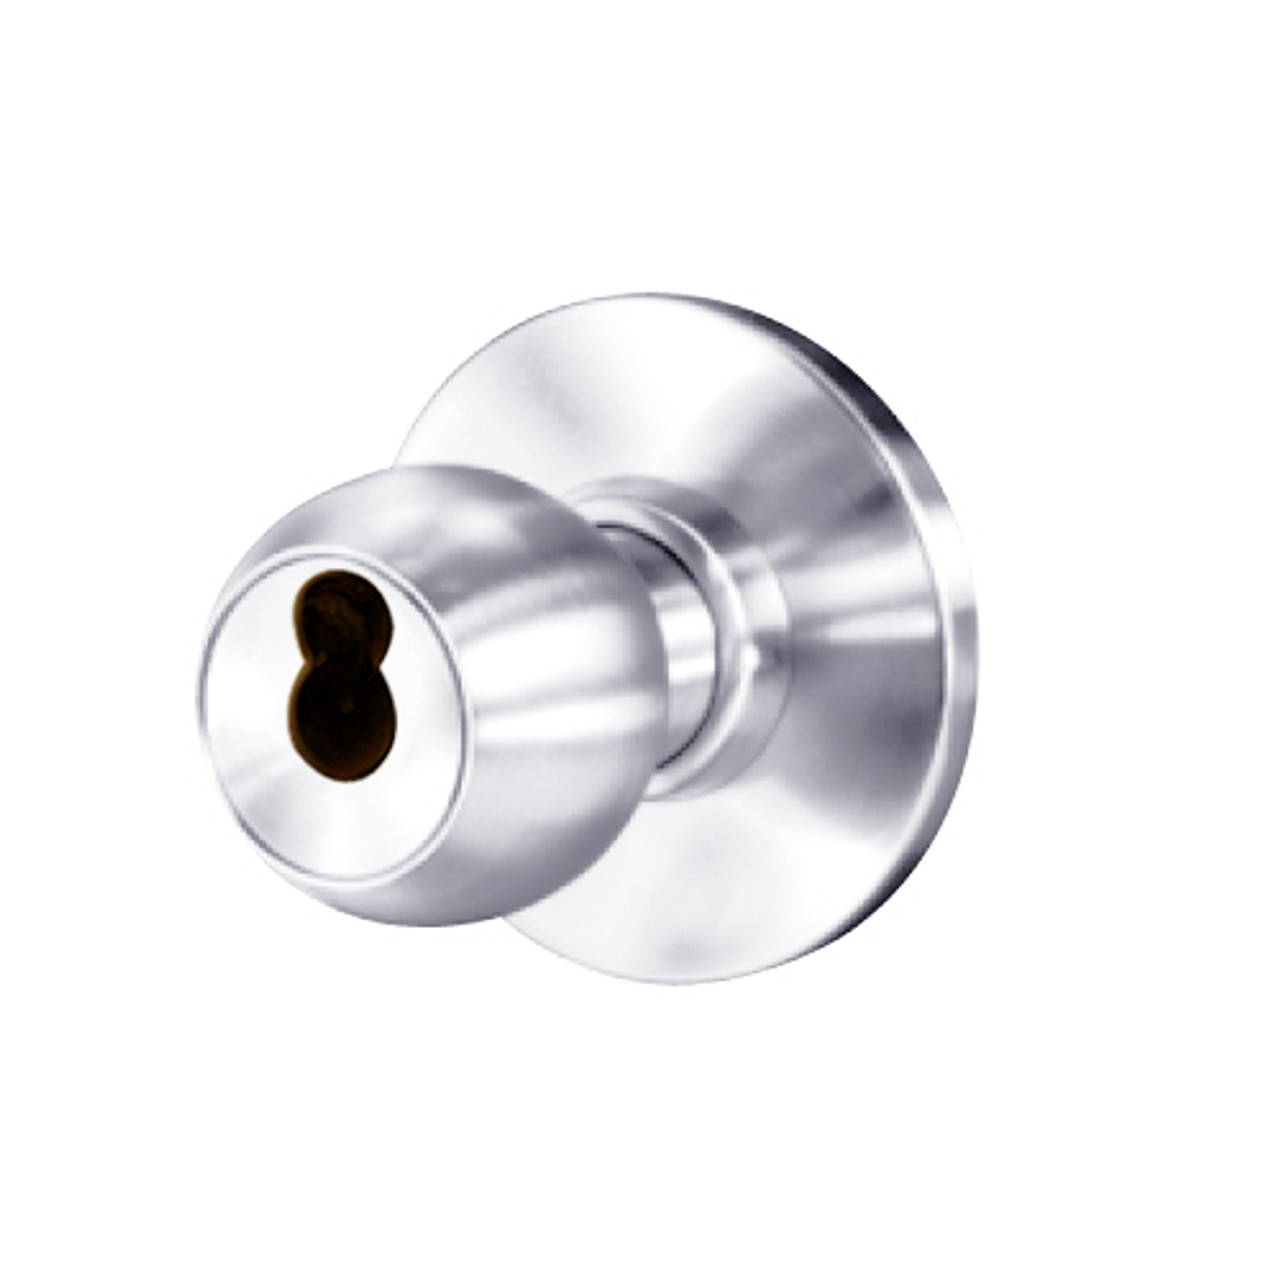 8K57YD4AS3625 Best 8K Series Exit Heavy Duty Cylindrical Knob Locks with Round Style in Bright Chrome